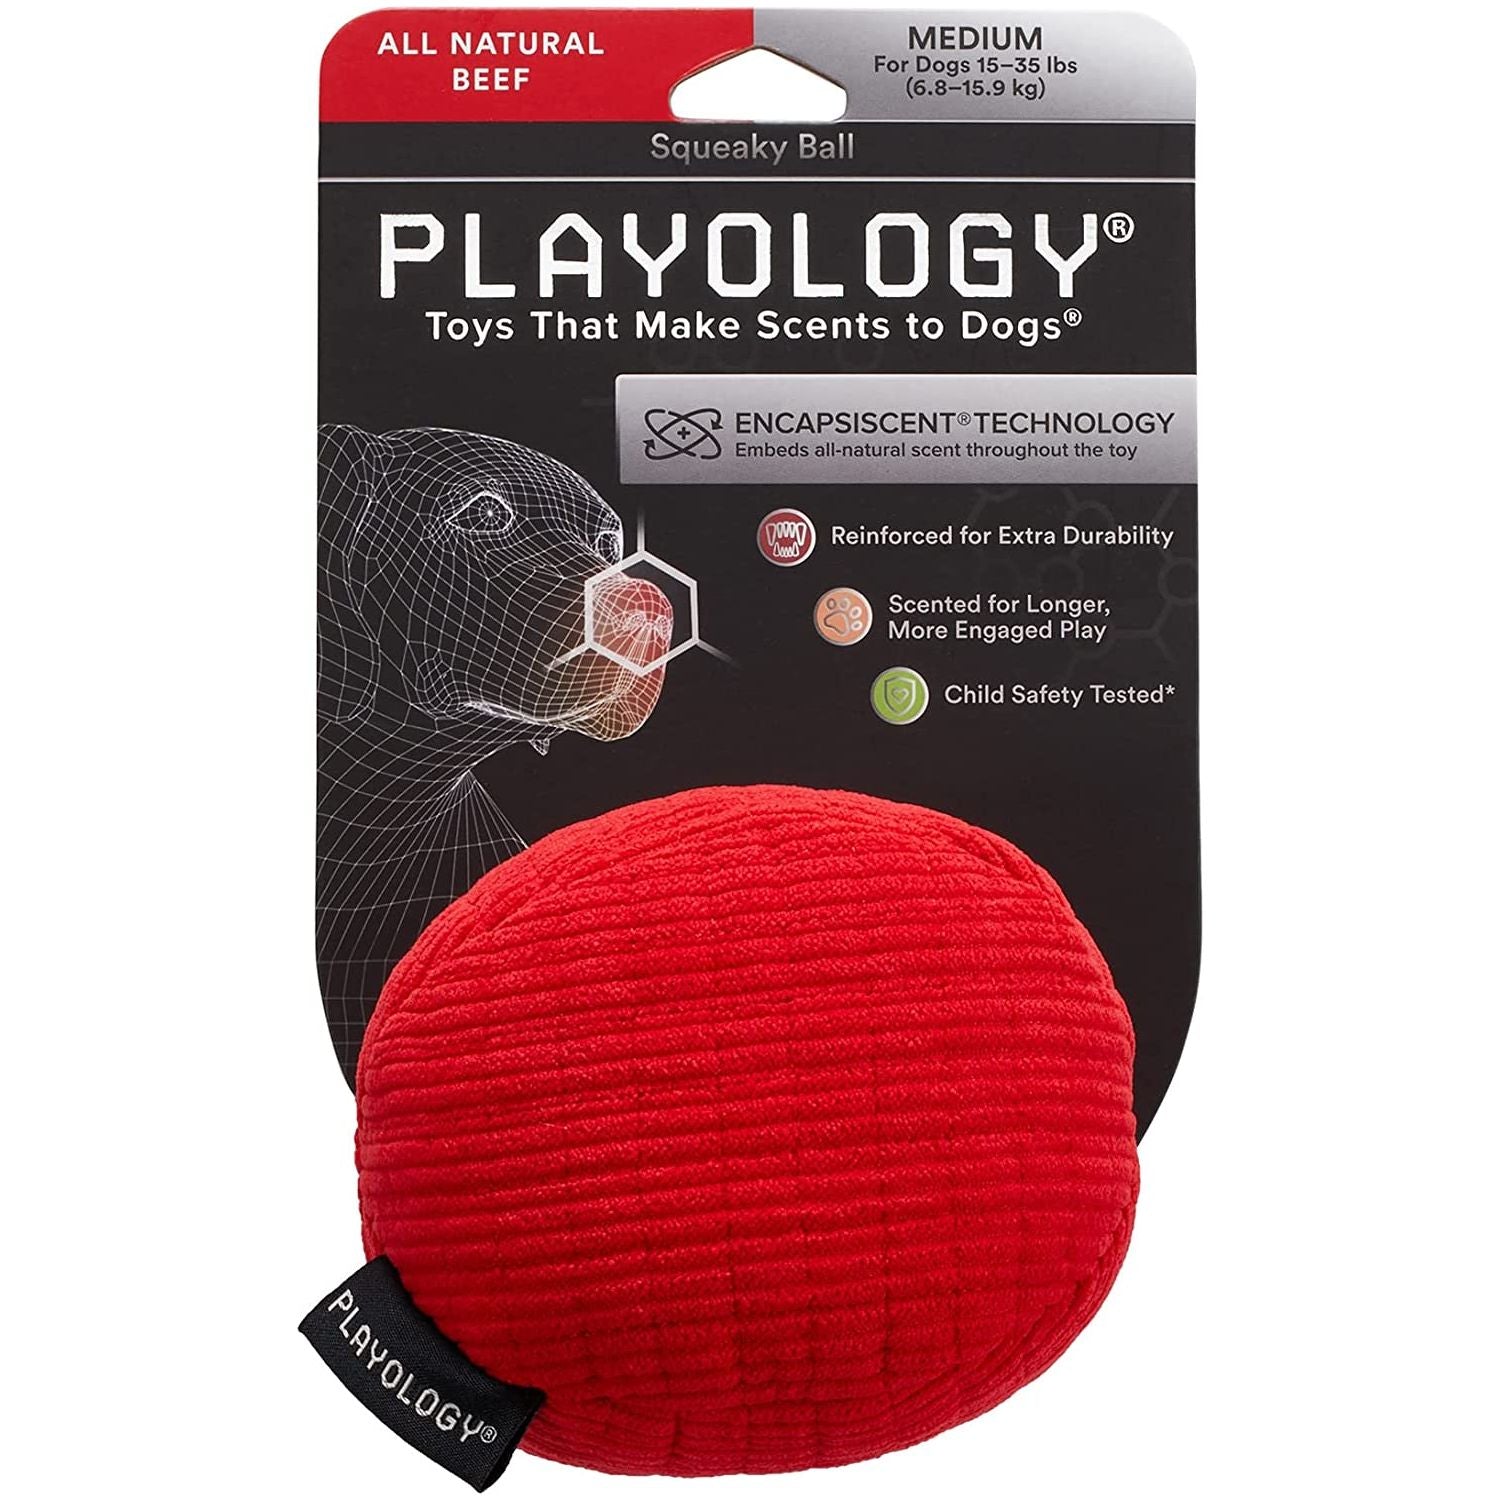 https://cdn.shopify.com/s/files/1/0048/2302/3731/products/playology-plush-squeaky-ball-dog-toy-all-natural-beef-scent-medium-660043.jpg?v=1642214402